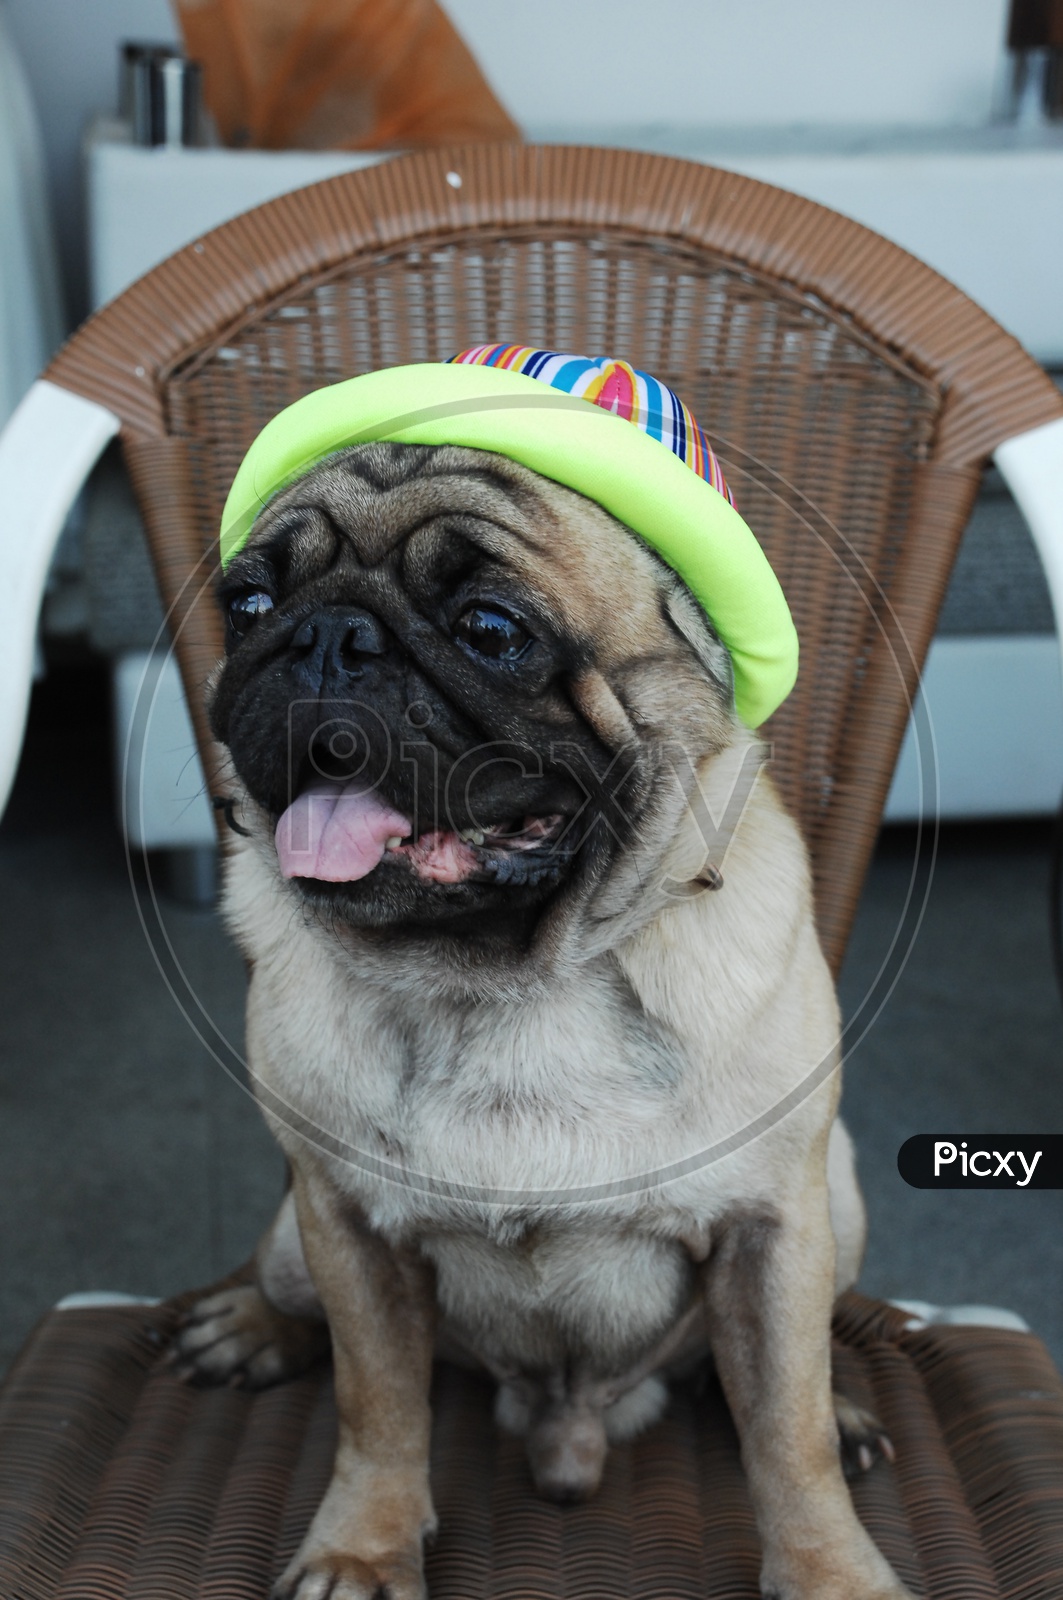 A Pug dog wearing a hat sat on the chair